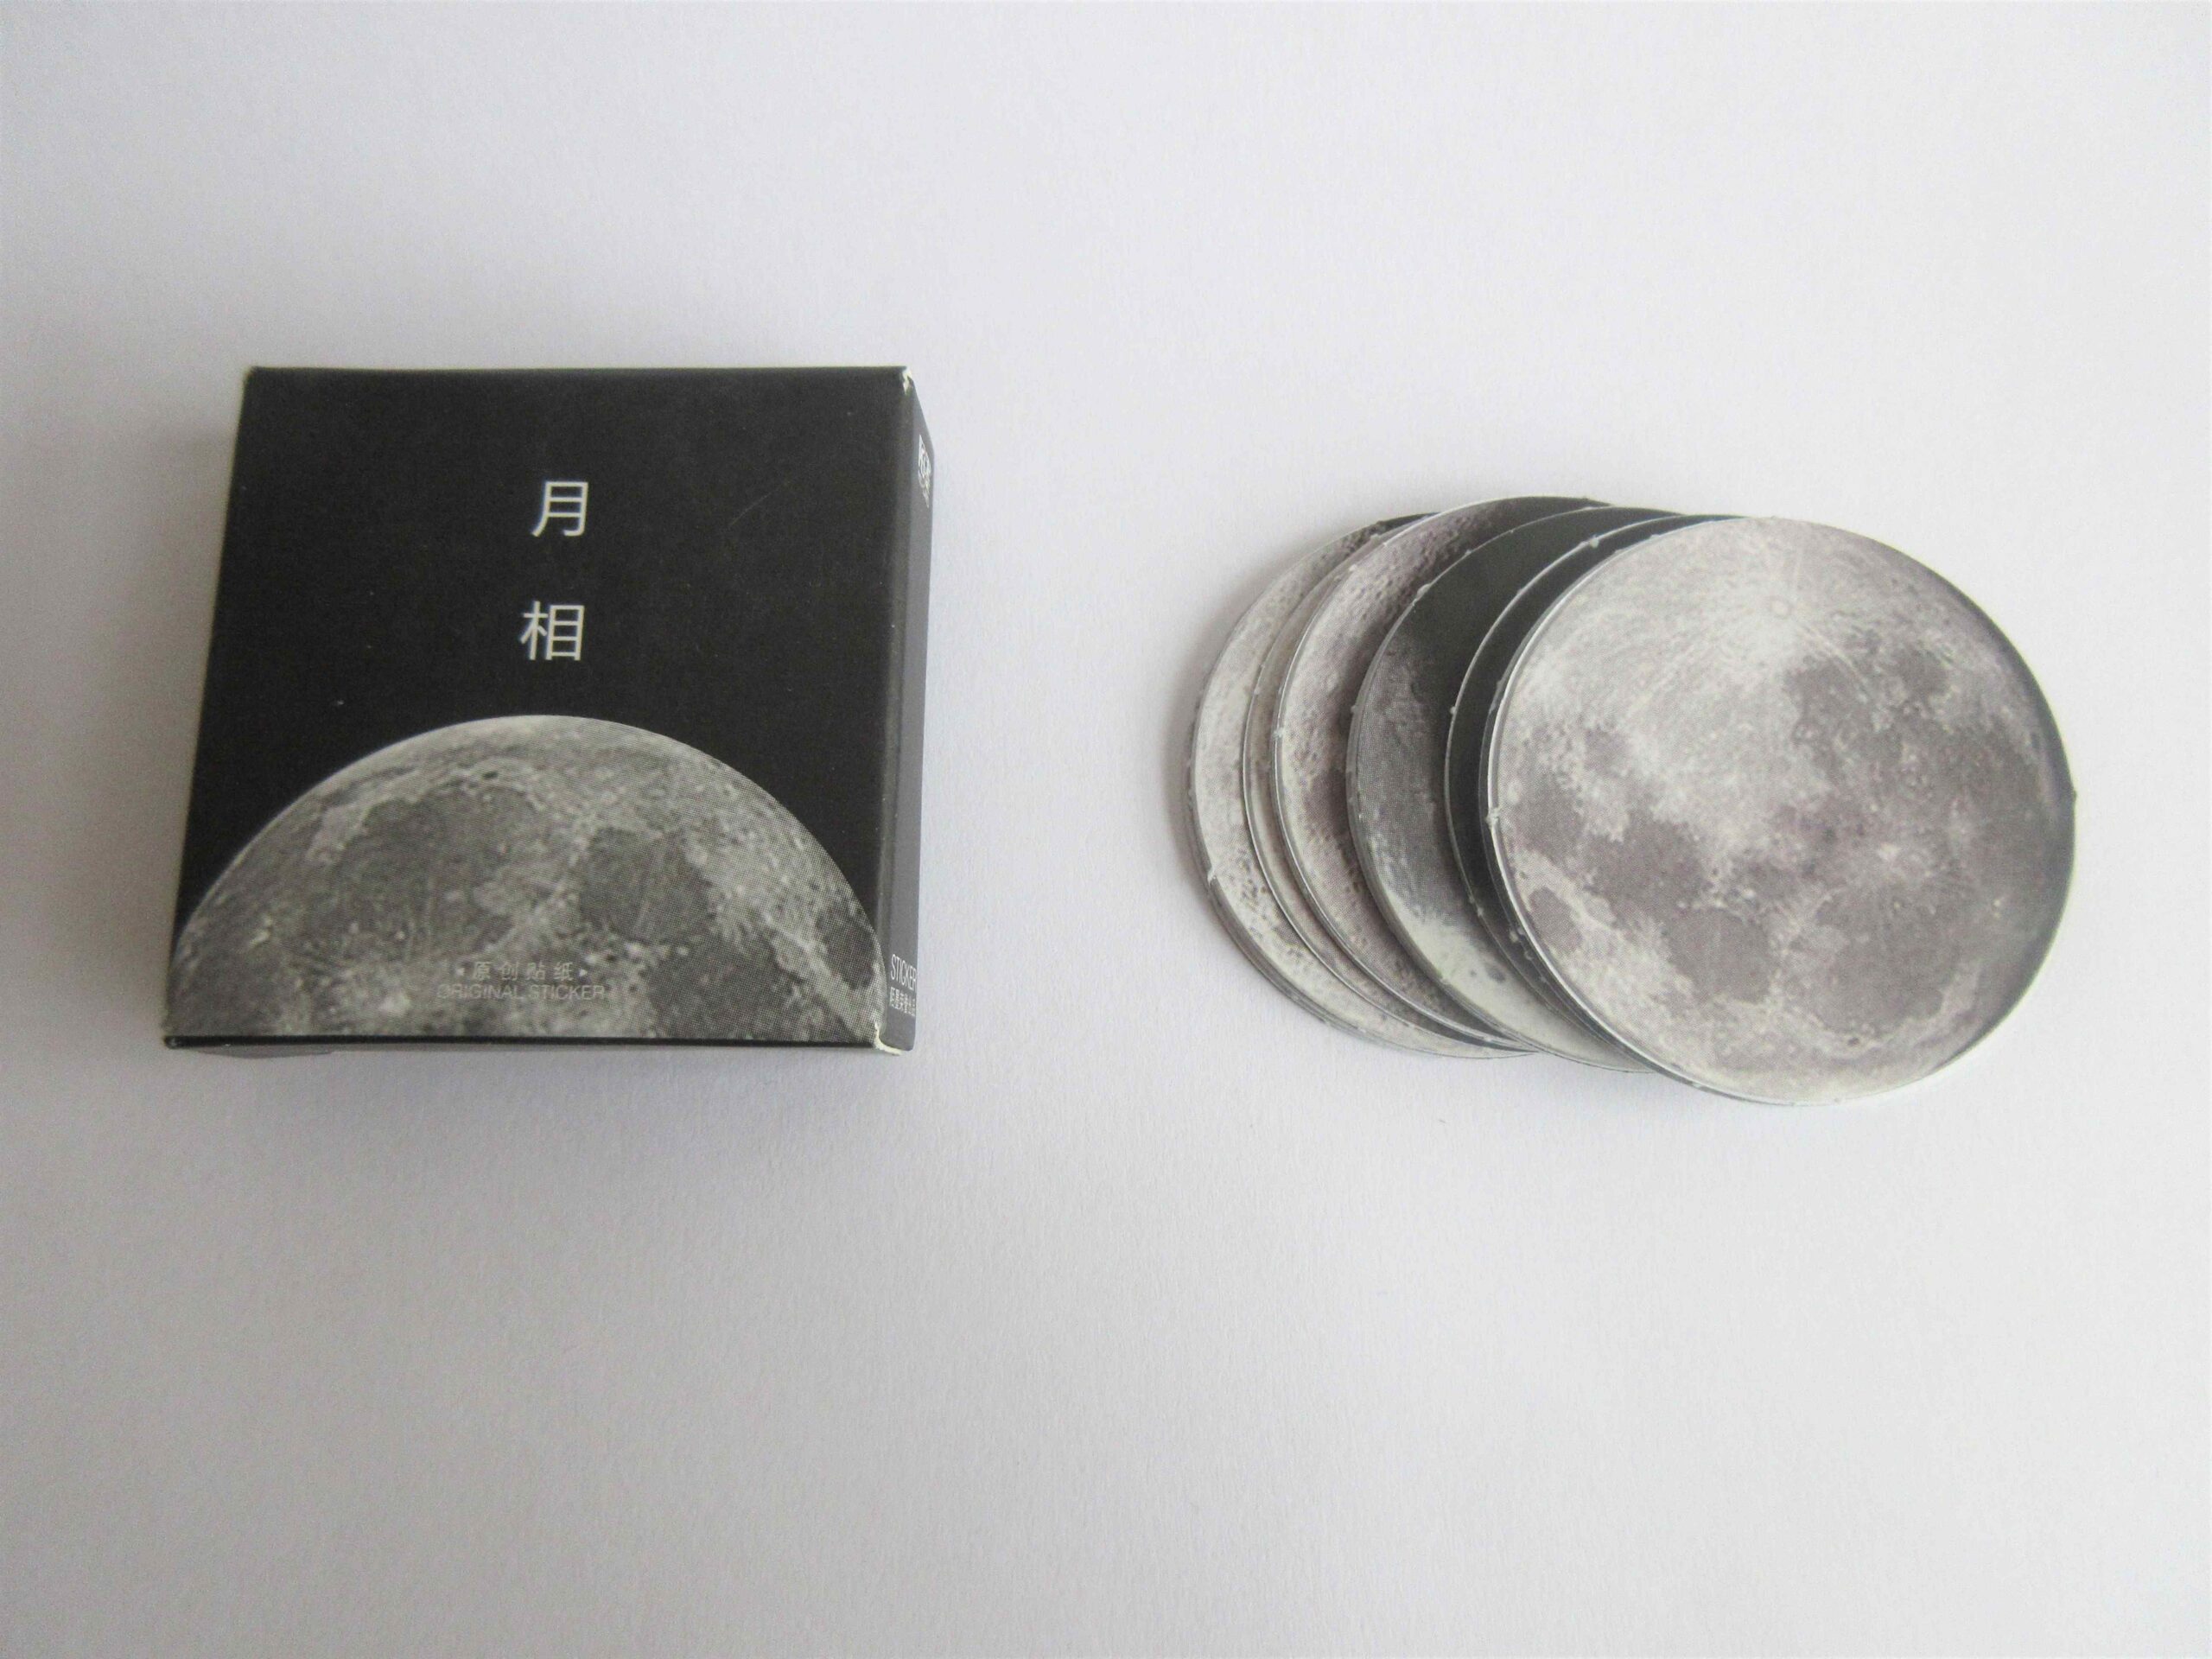 Moon stickers and their packaging